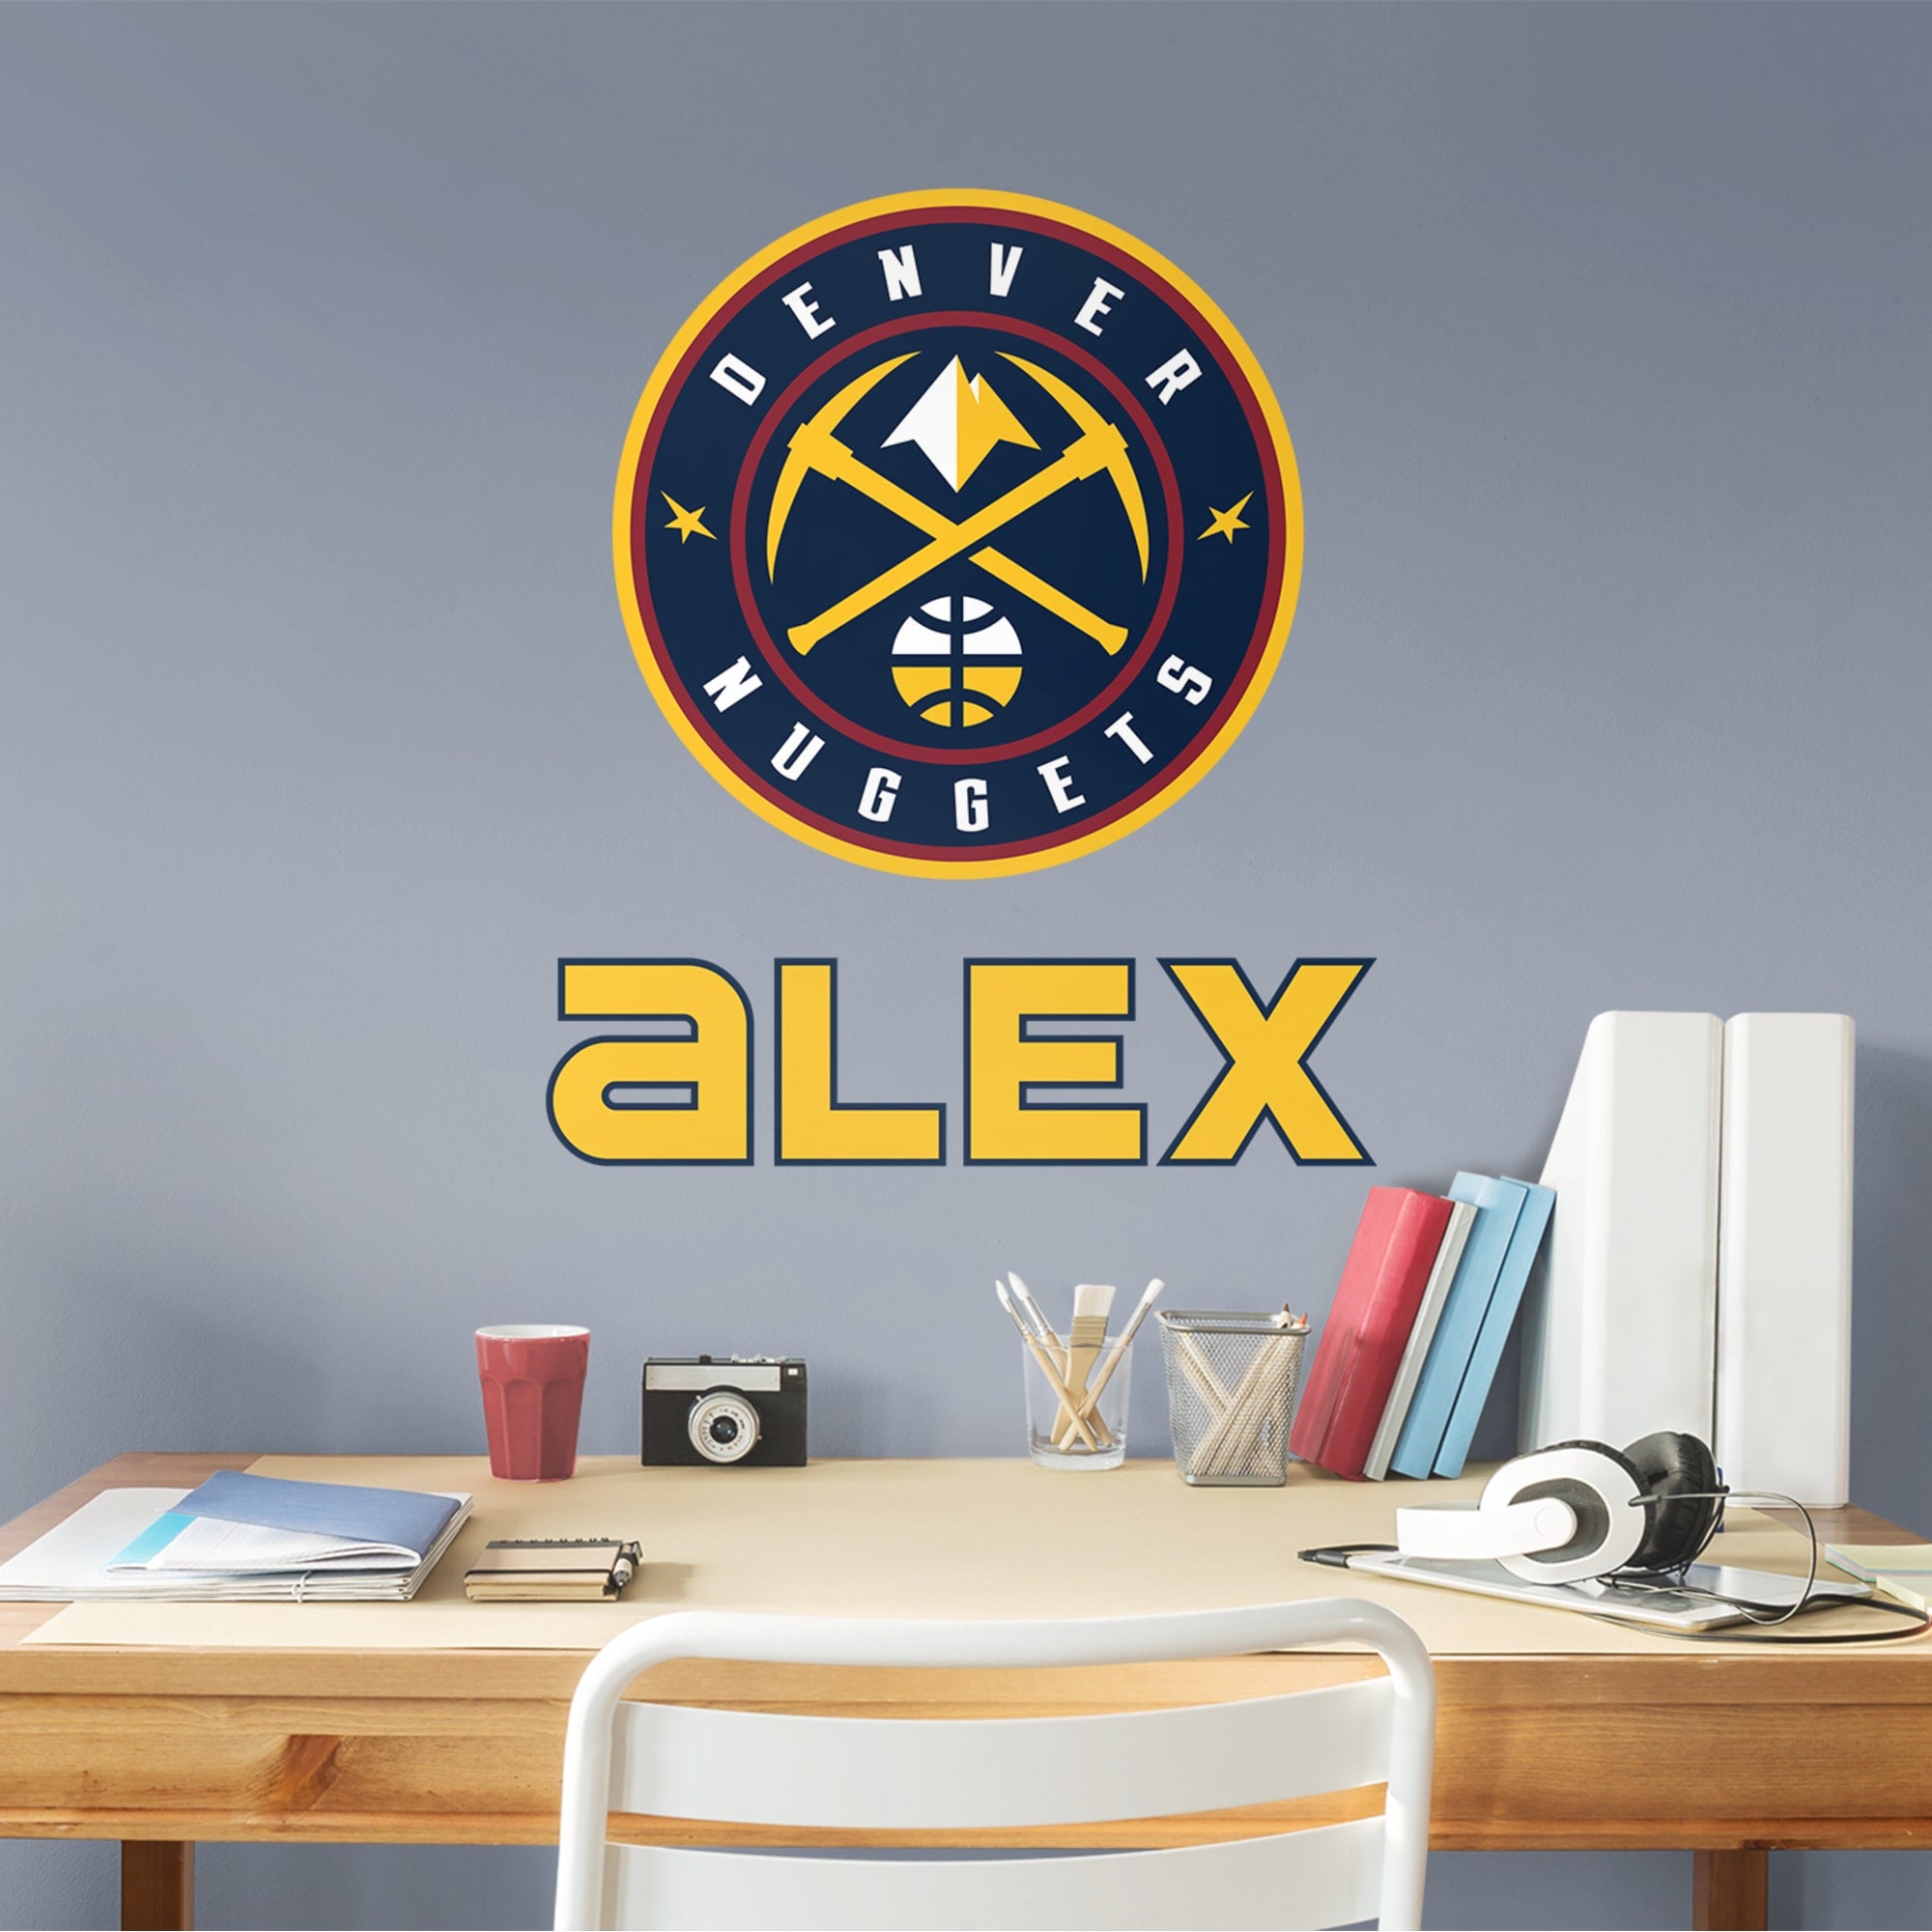 Denver Nuggets: Stacked Personalized Name - Officially Licensed NBA Transfer Decal in Yellow by Fathead | Vinyl